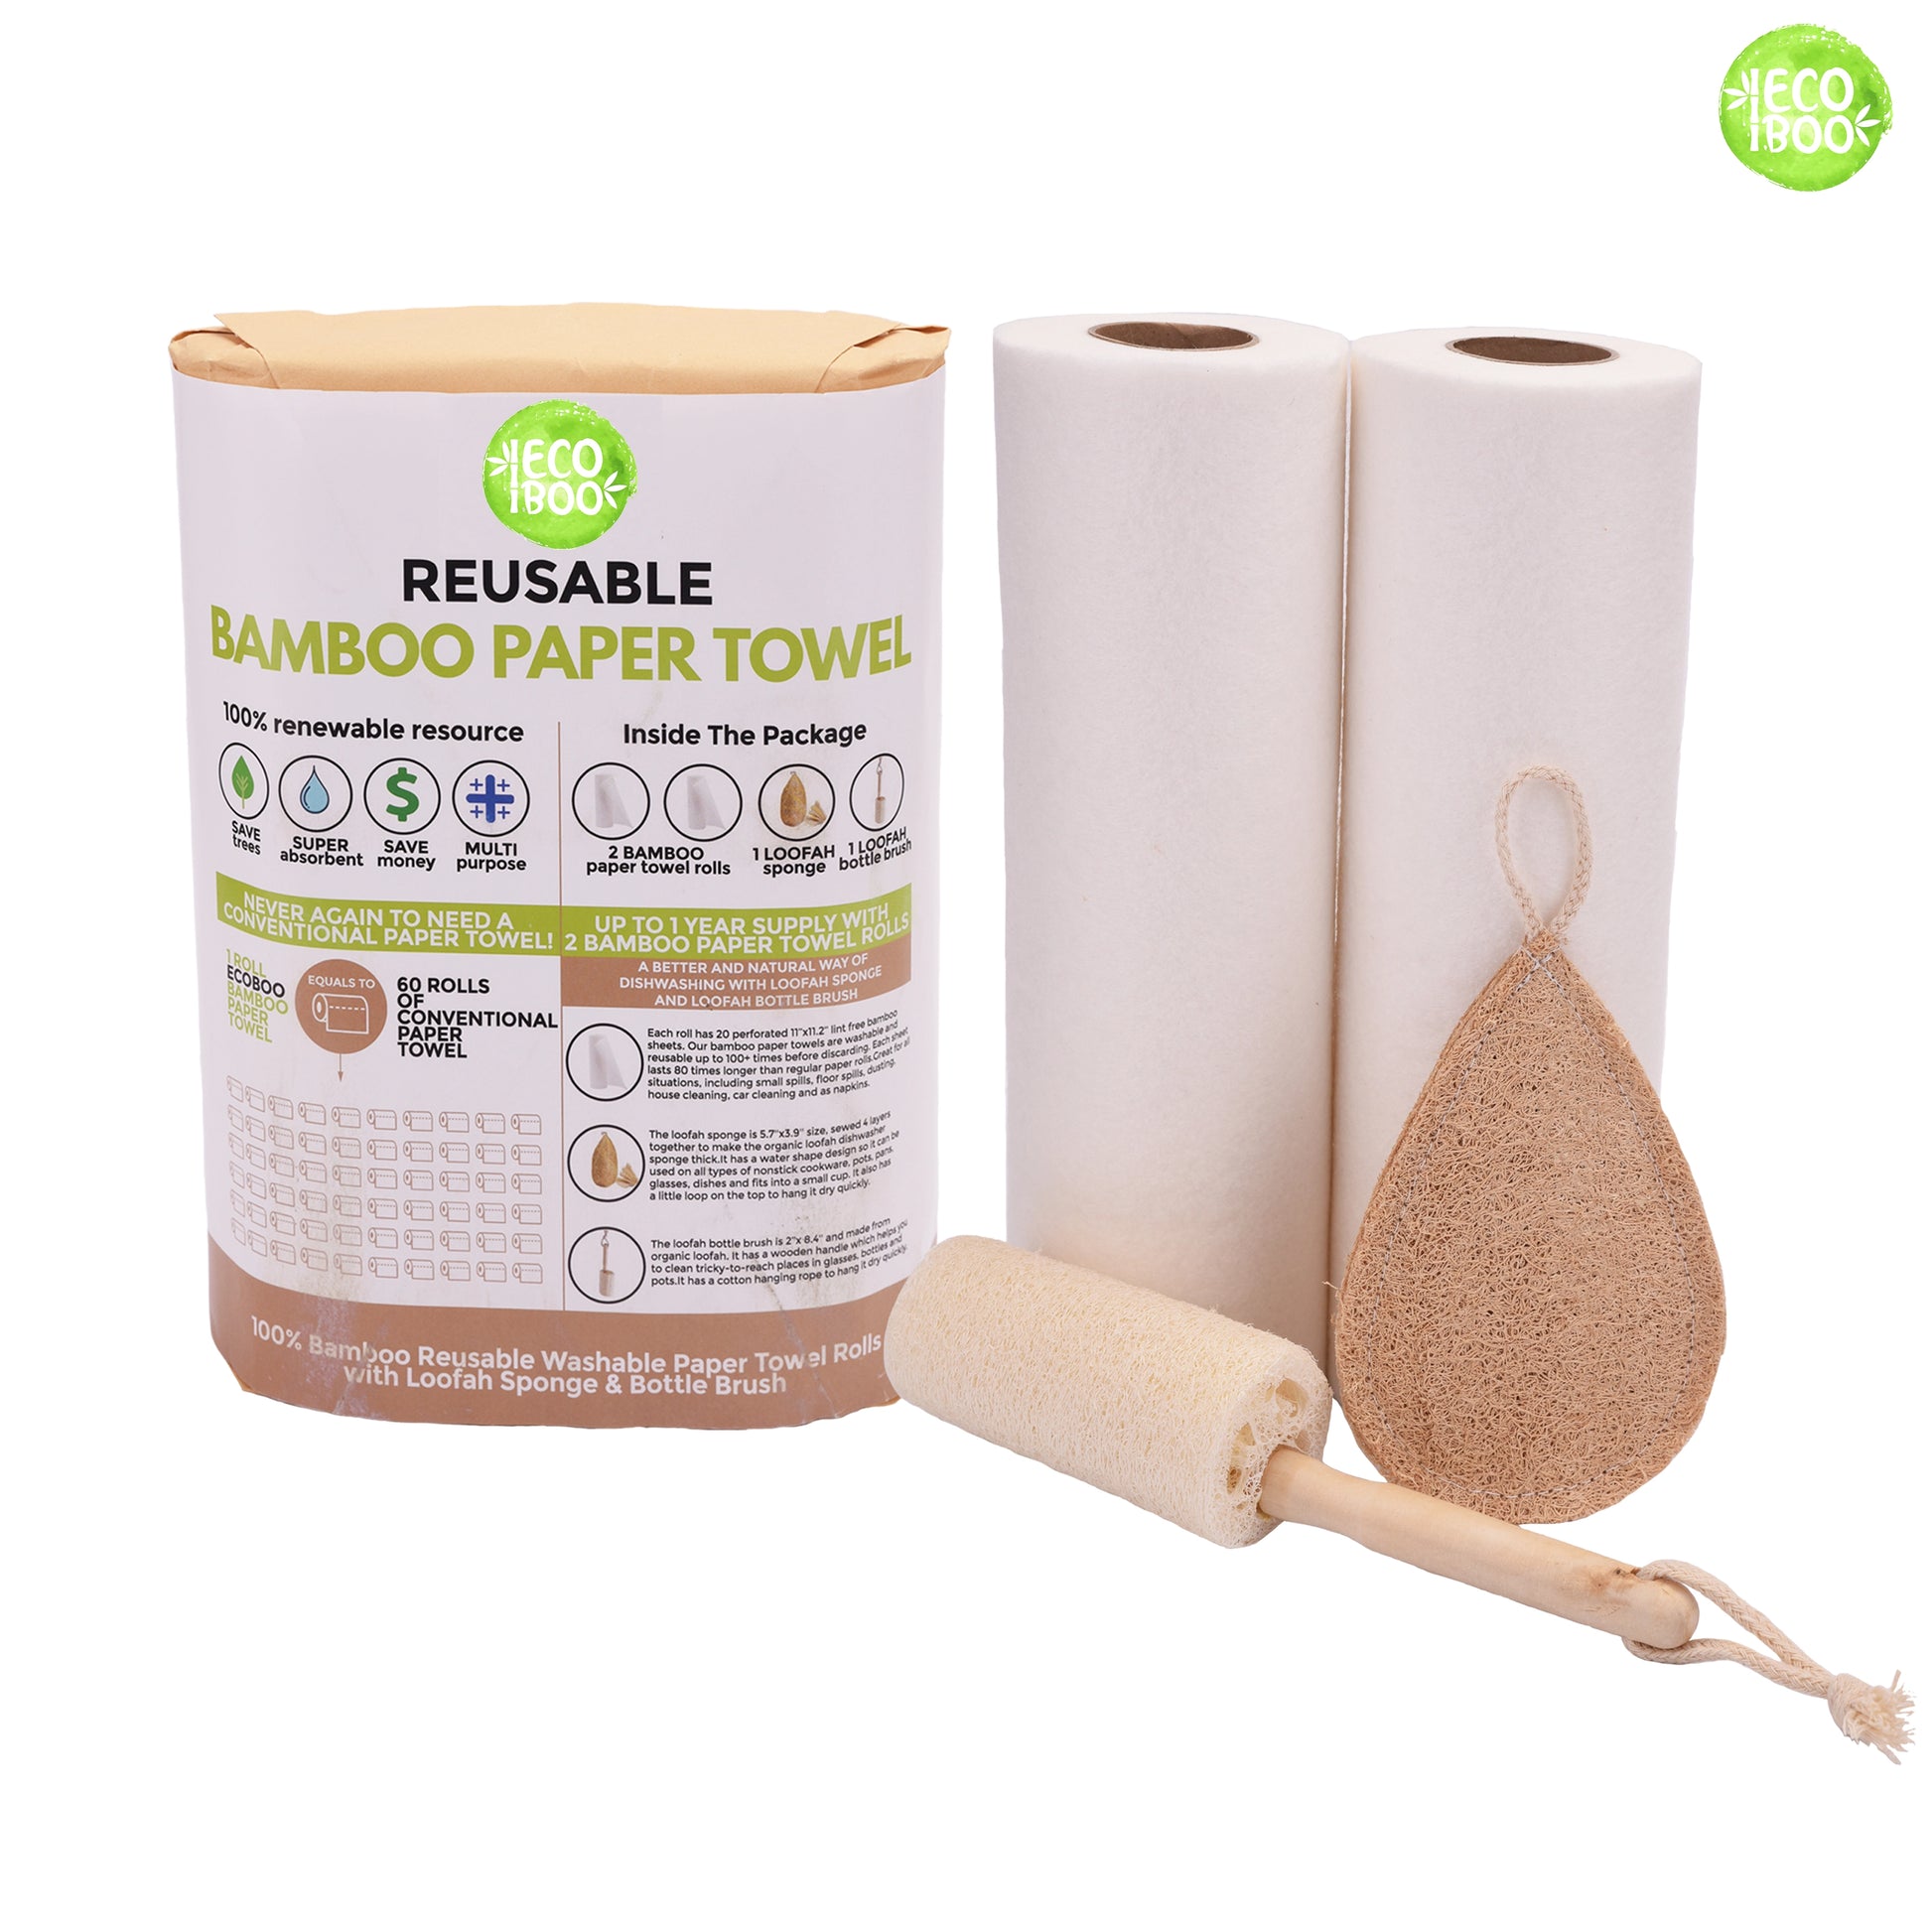 Premium Eco-Friendly Cleaning Set Reusable Bamboo Paper Towels Natural Cleaning Tools. Reusable paper towels & loofah sponge & loofah brush with handle